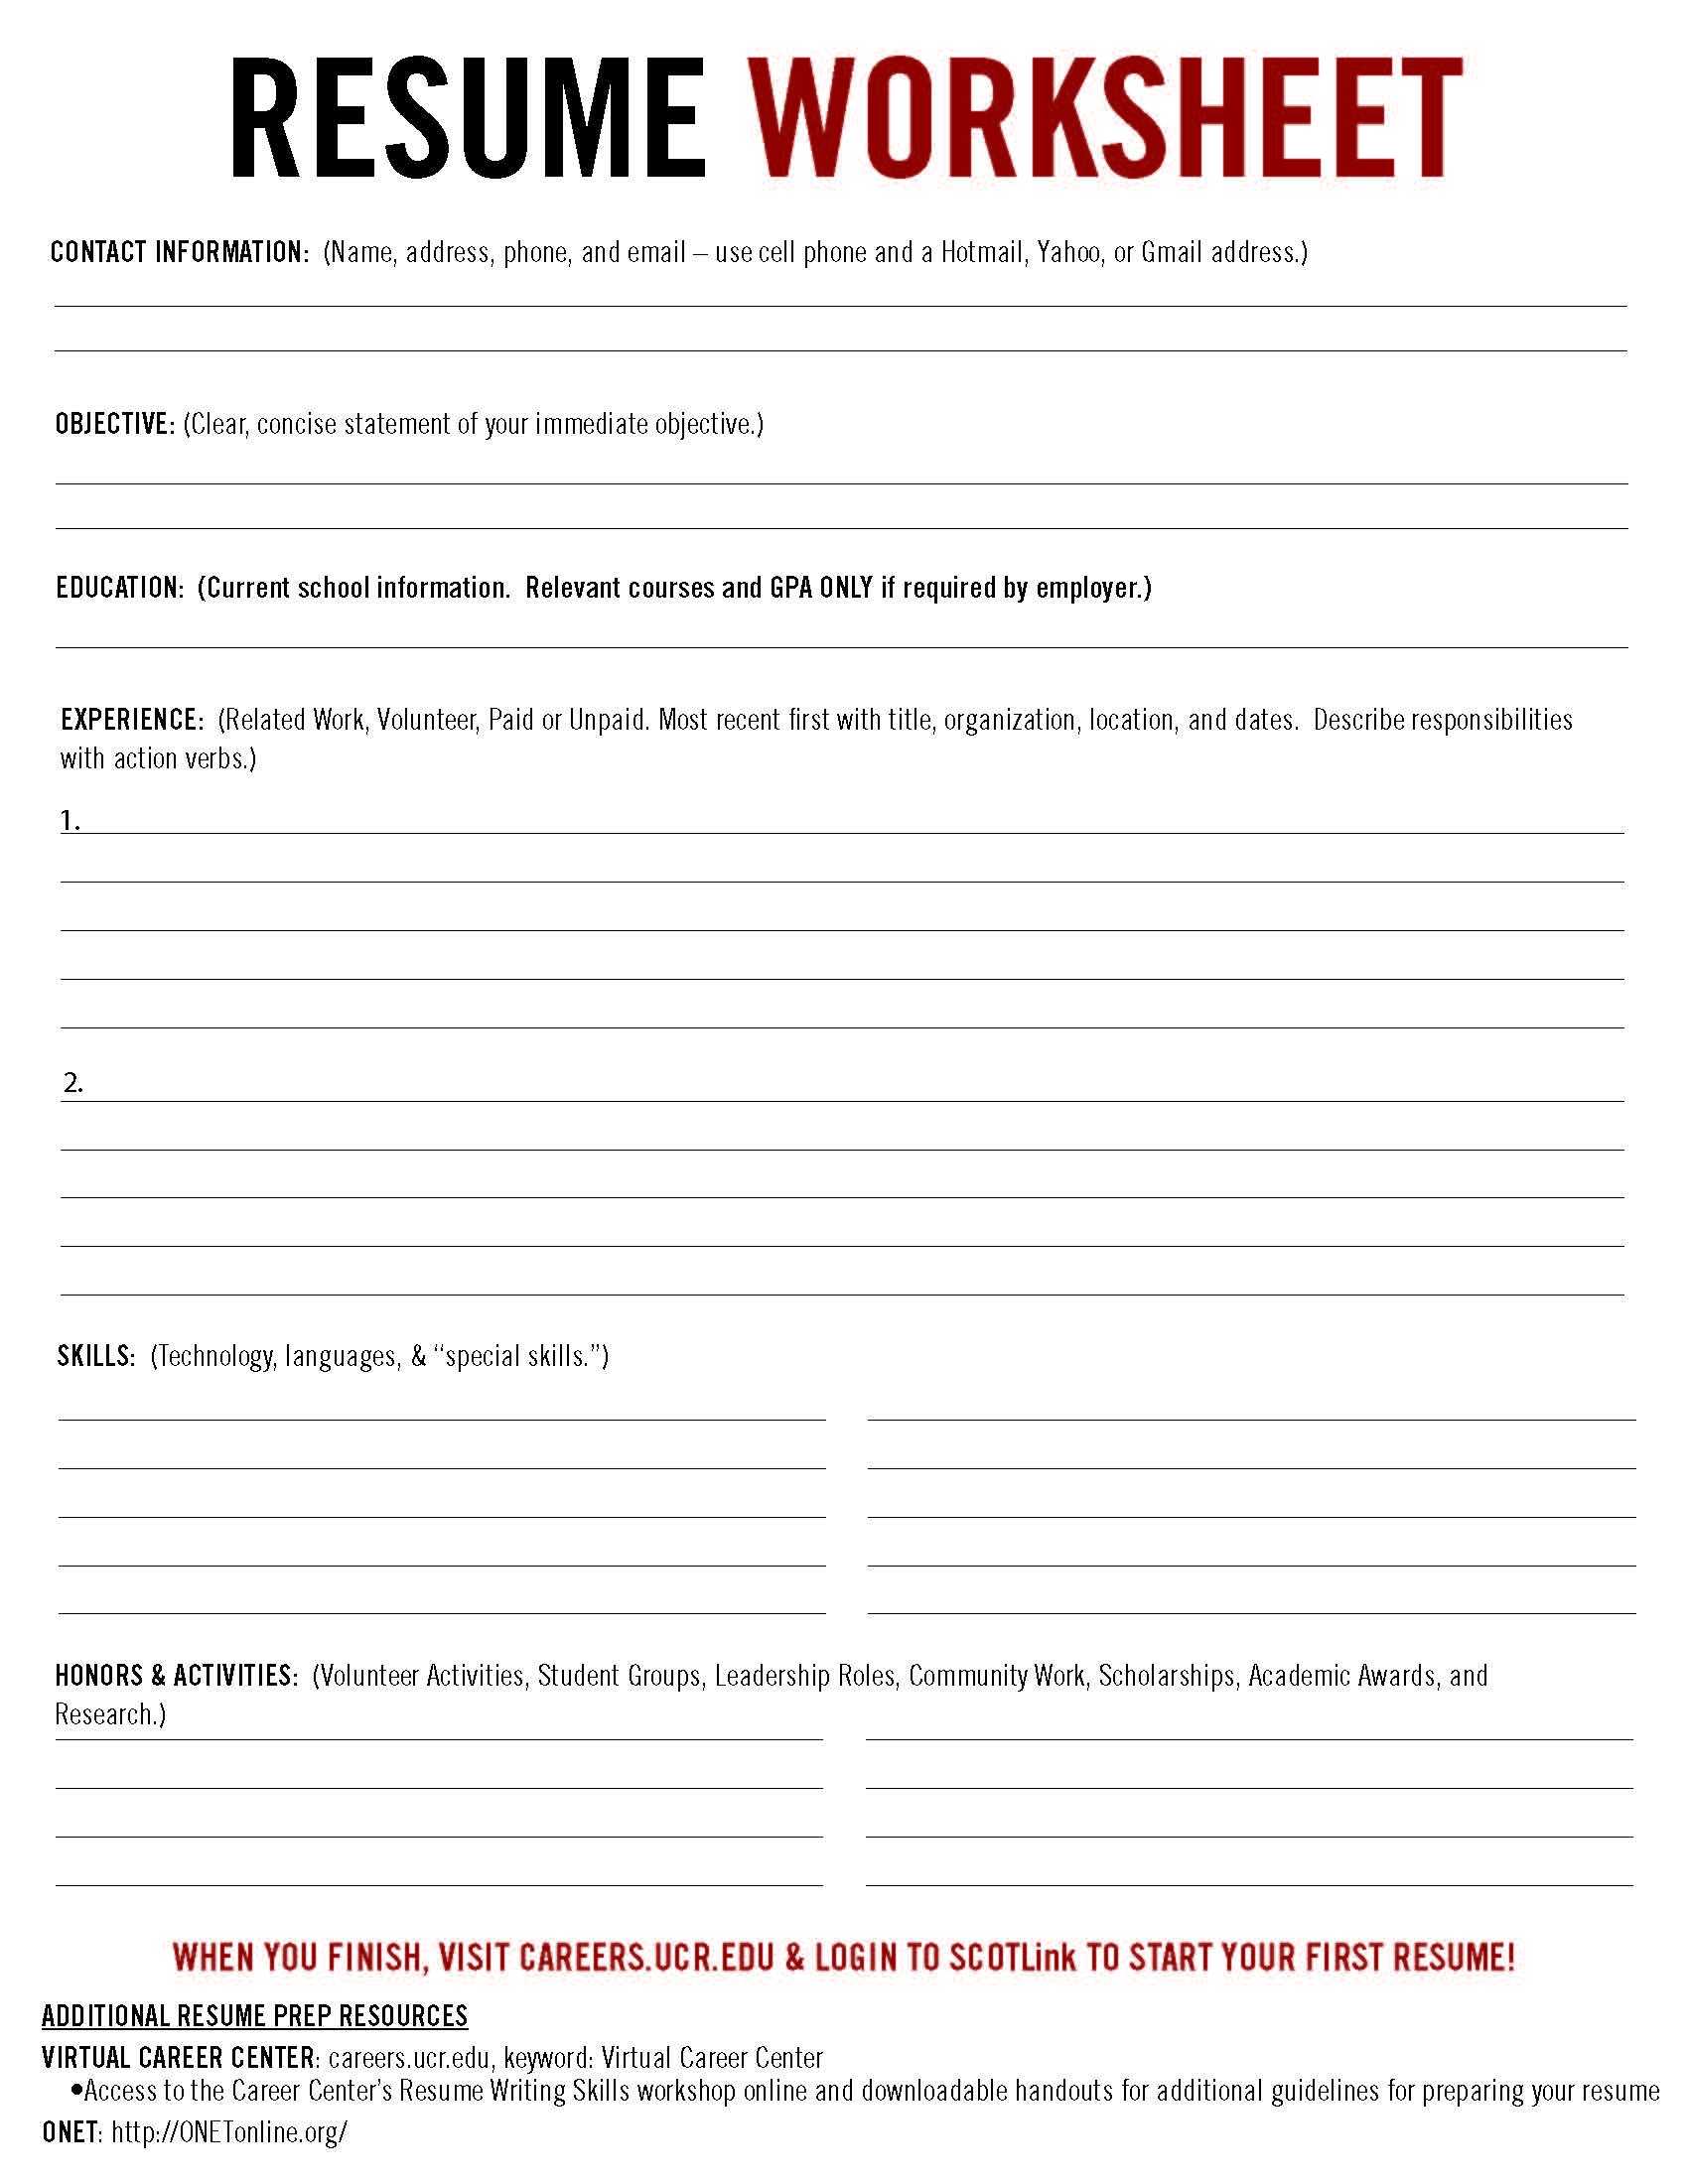 Career Research Worksheet Also Unique Resume Worksheets Elaboration Professional Resume Examples